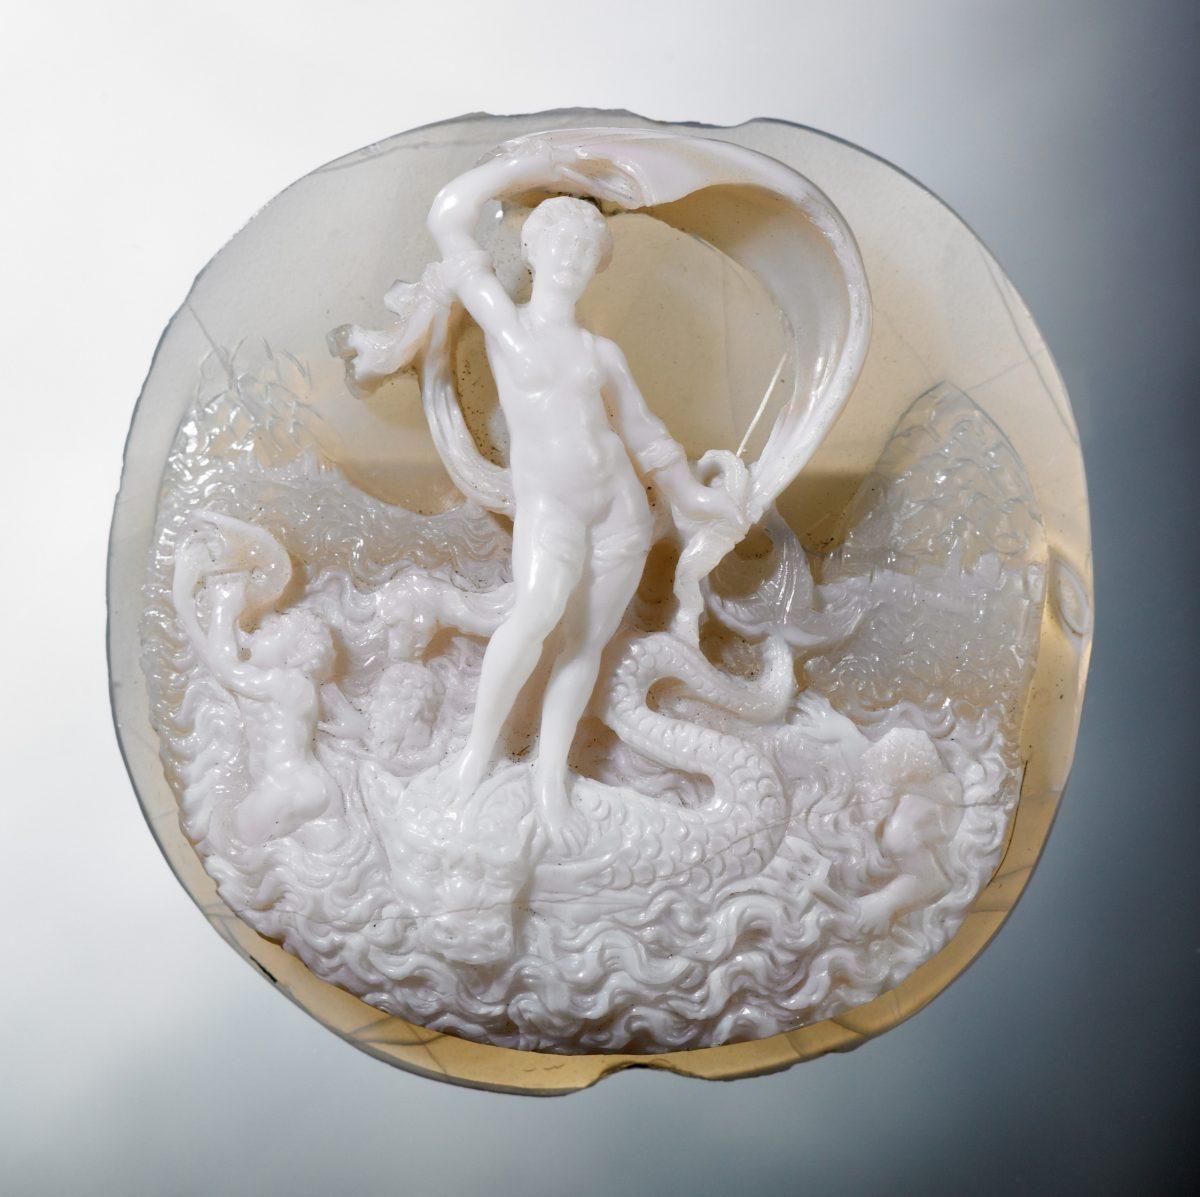 Cameo: “Venus Rising From the Waves,” 16th century. Agate. (Holburne Museum/TonyGilbert.co.uk)